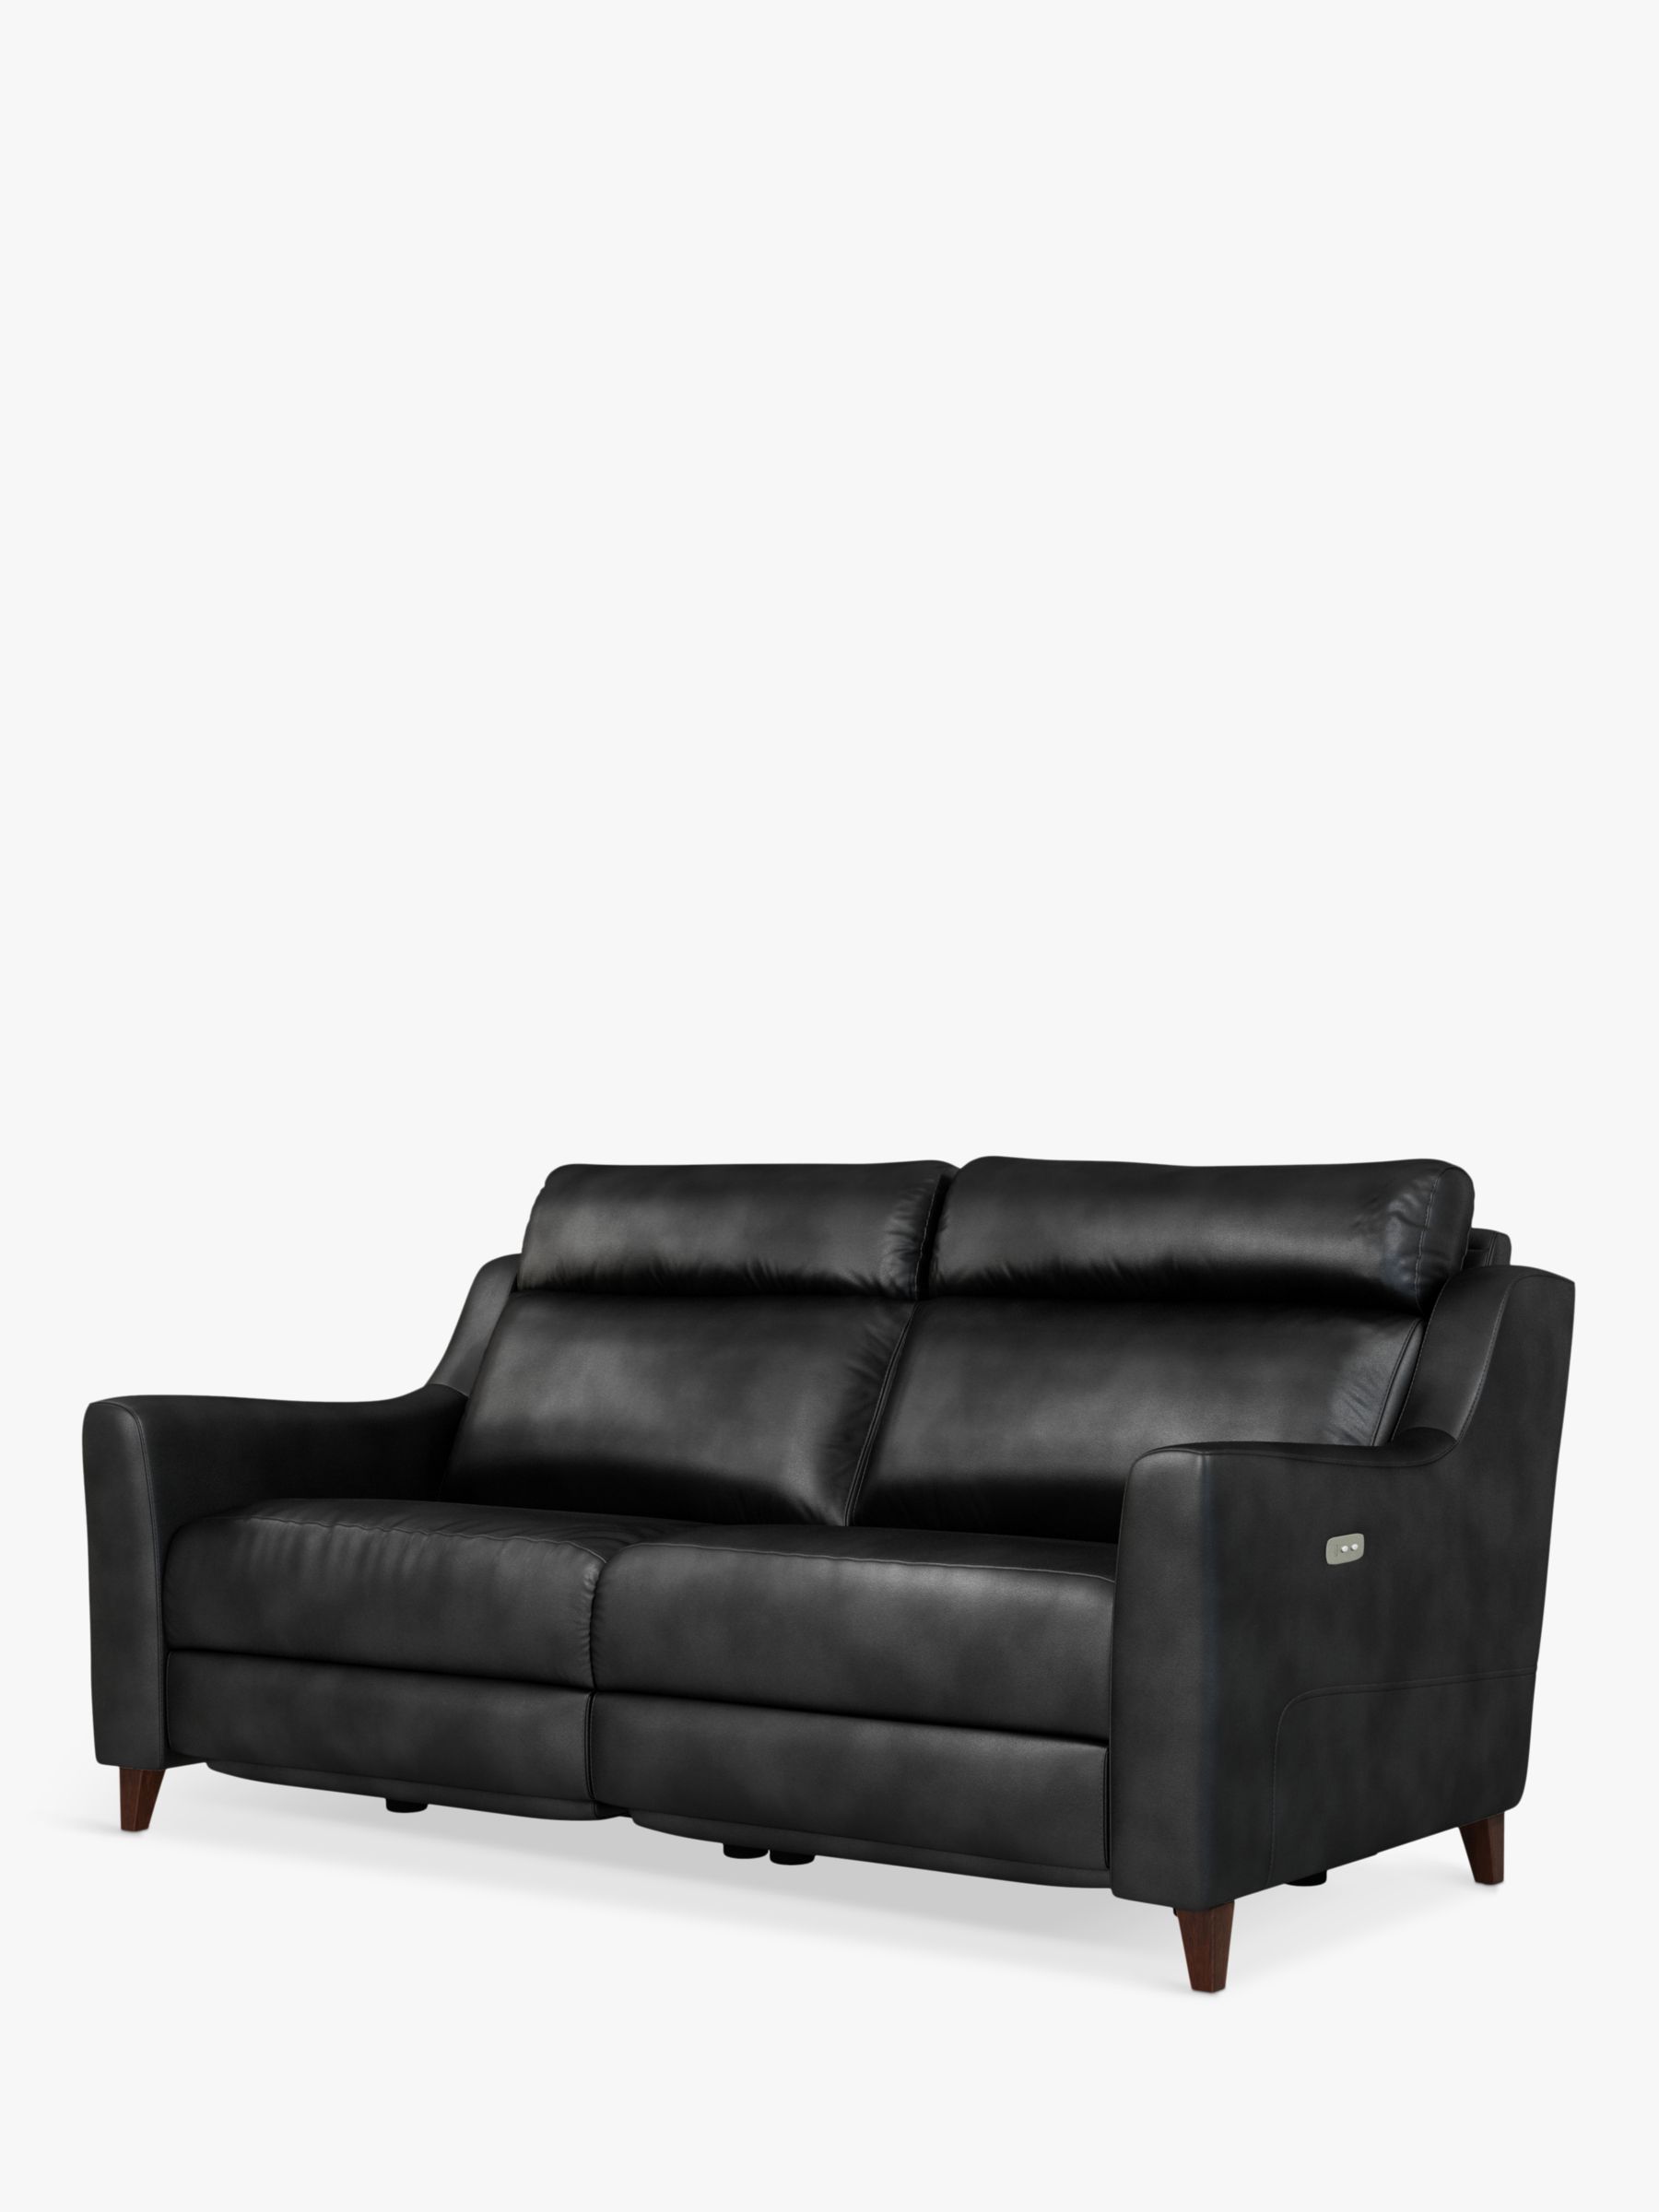 2 Seater Power Recliner Leather Sofa, Leather 2 Seater Sofa Recliner